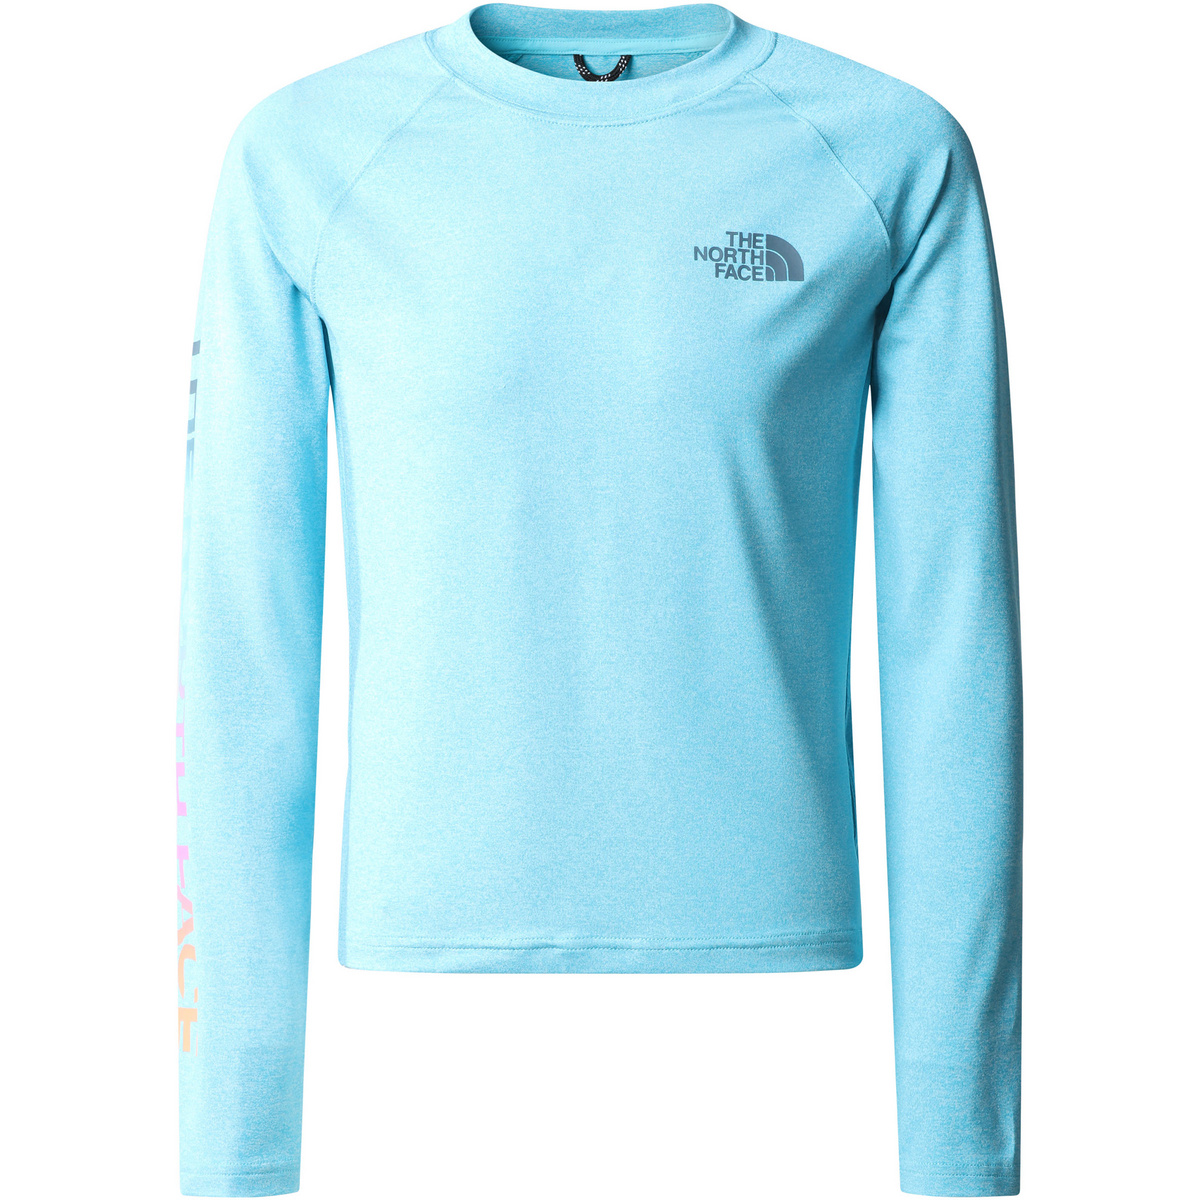 The North Face Kinder Amphibious Sun Longsleeve von The North Face